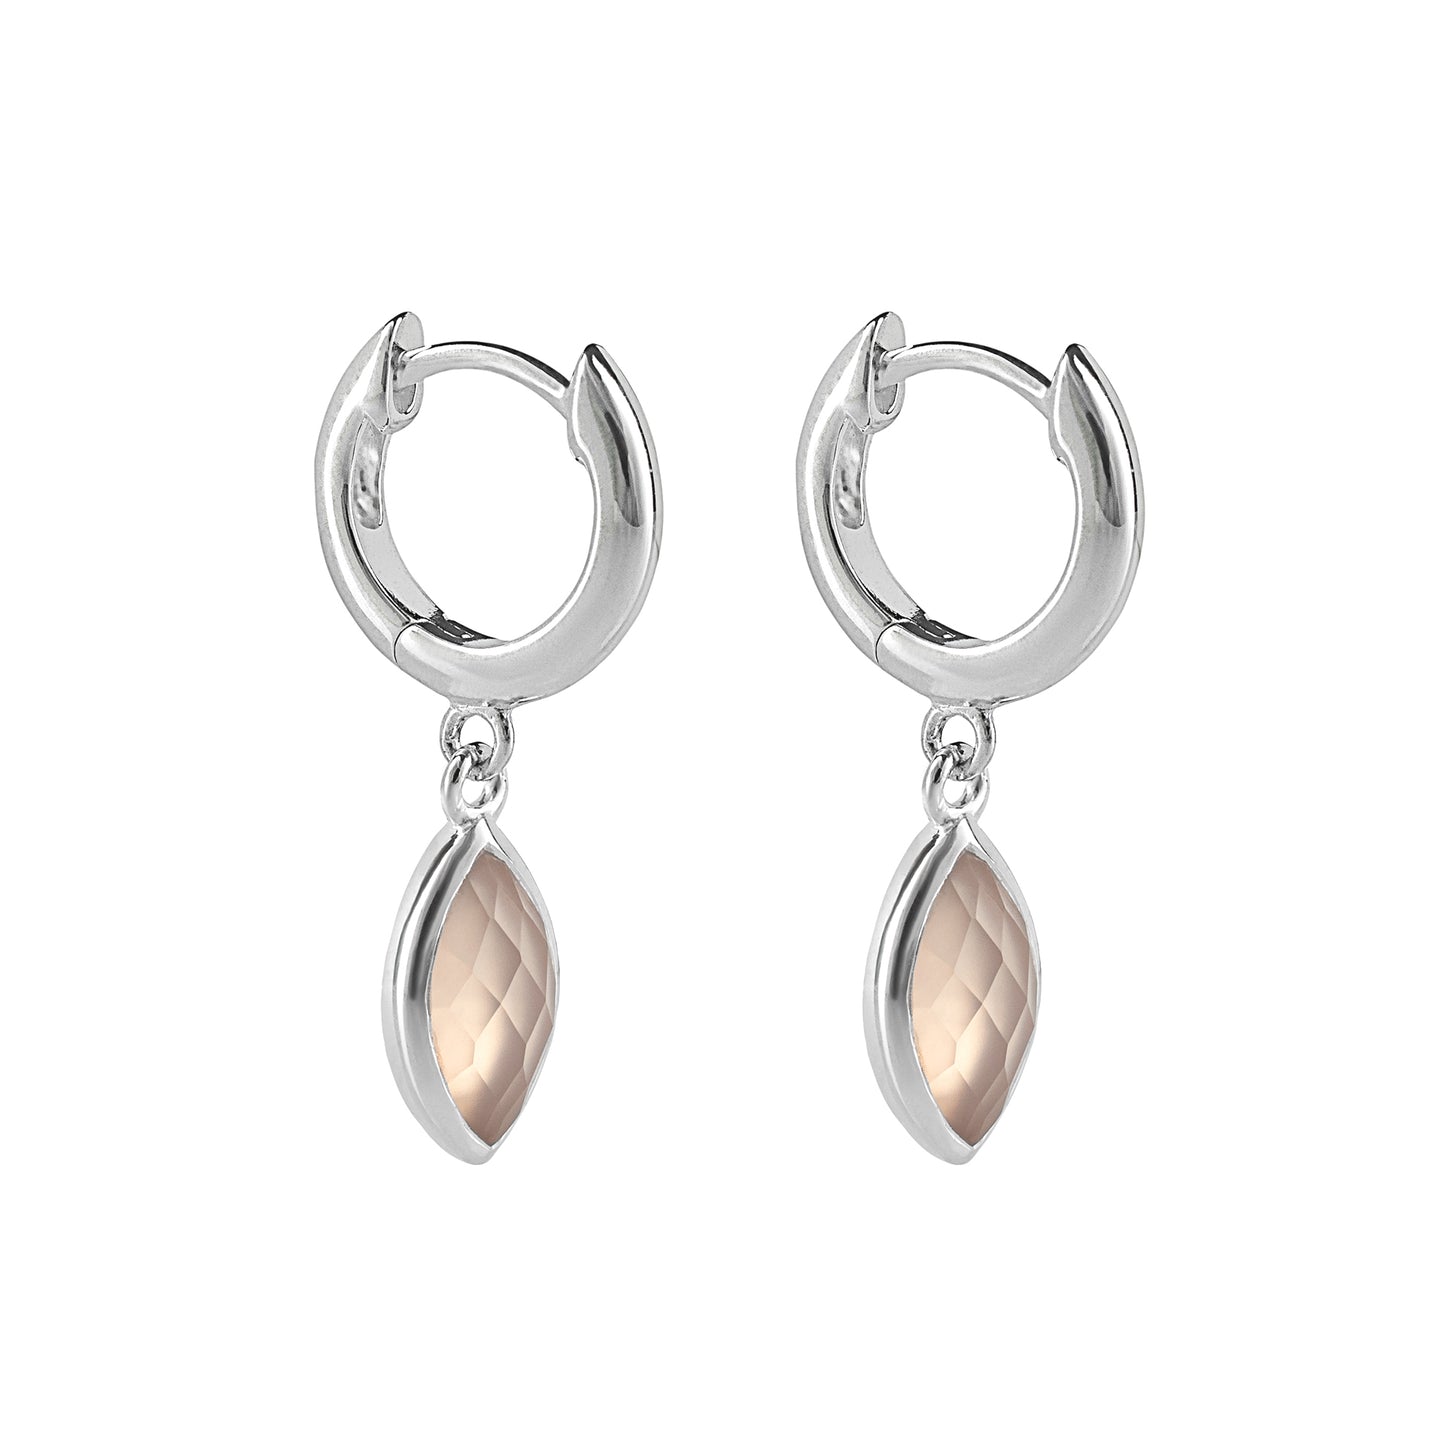 Recycled Silver Hoop Earrings With Marquise Pink Chalcedony Charm